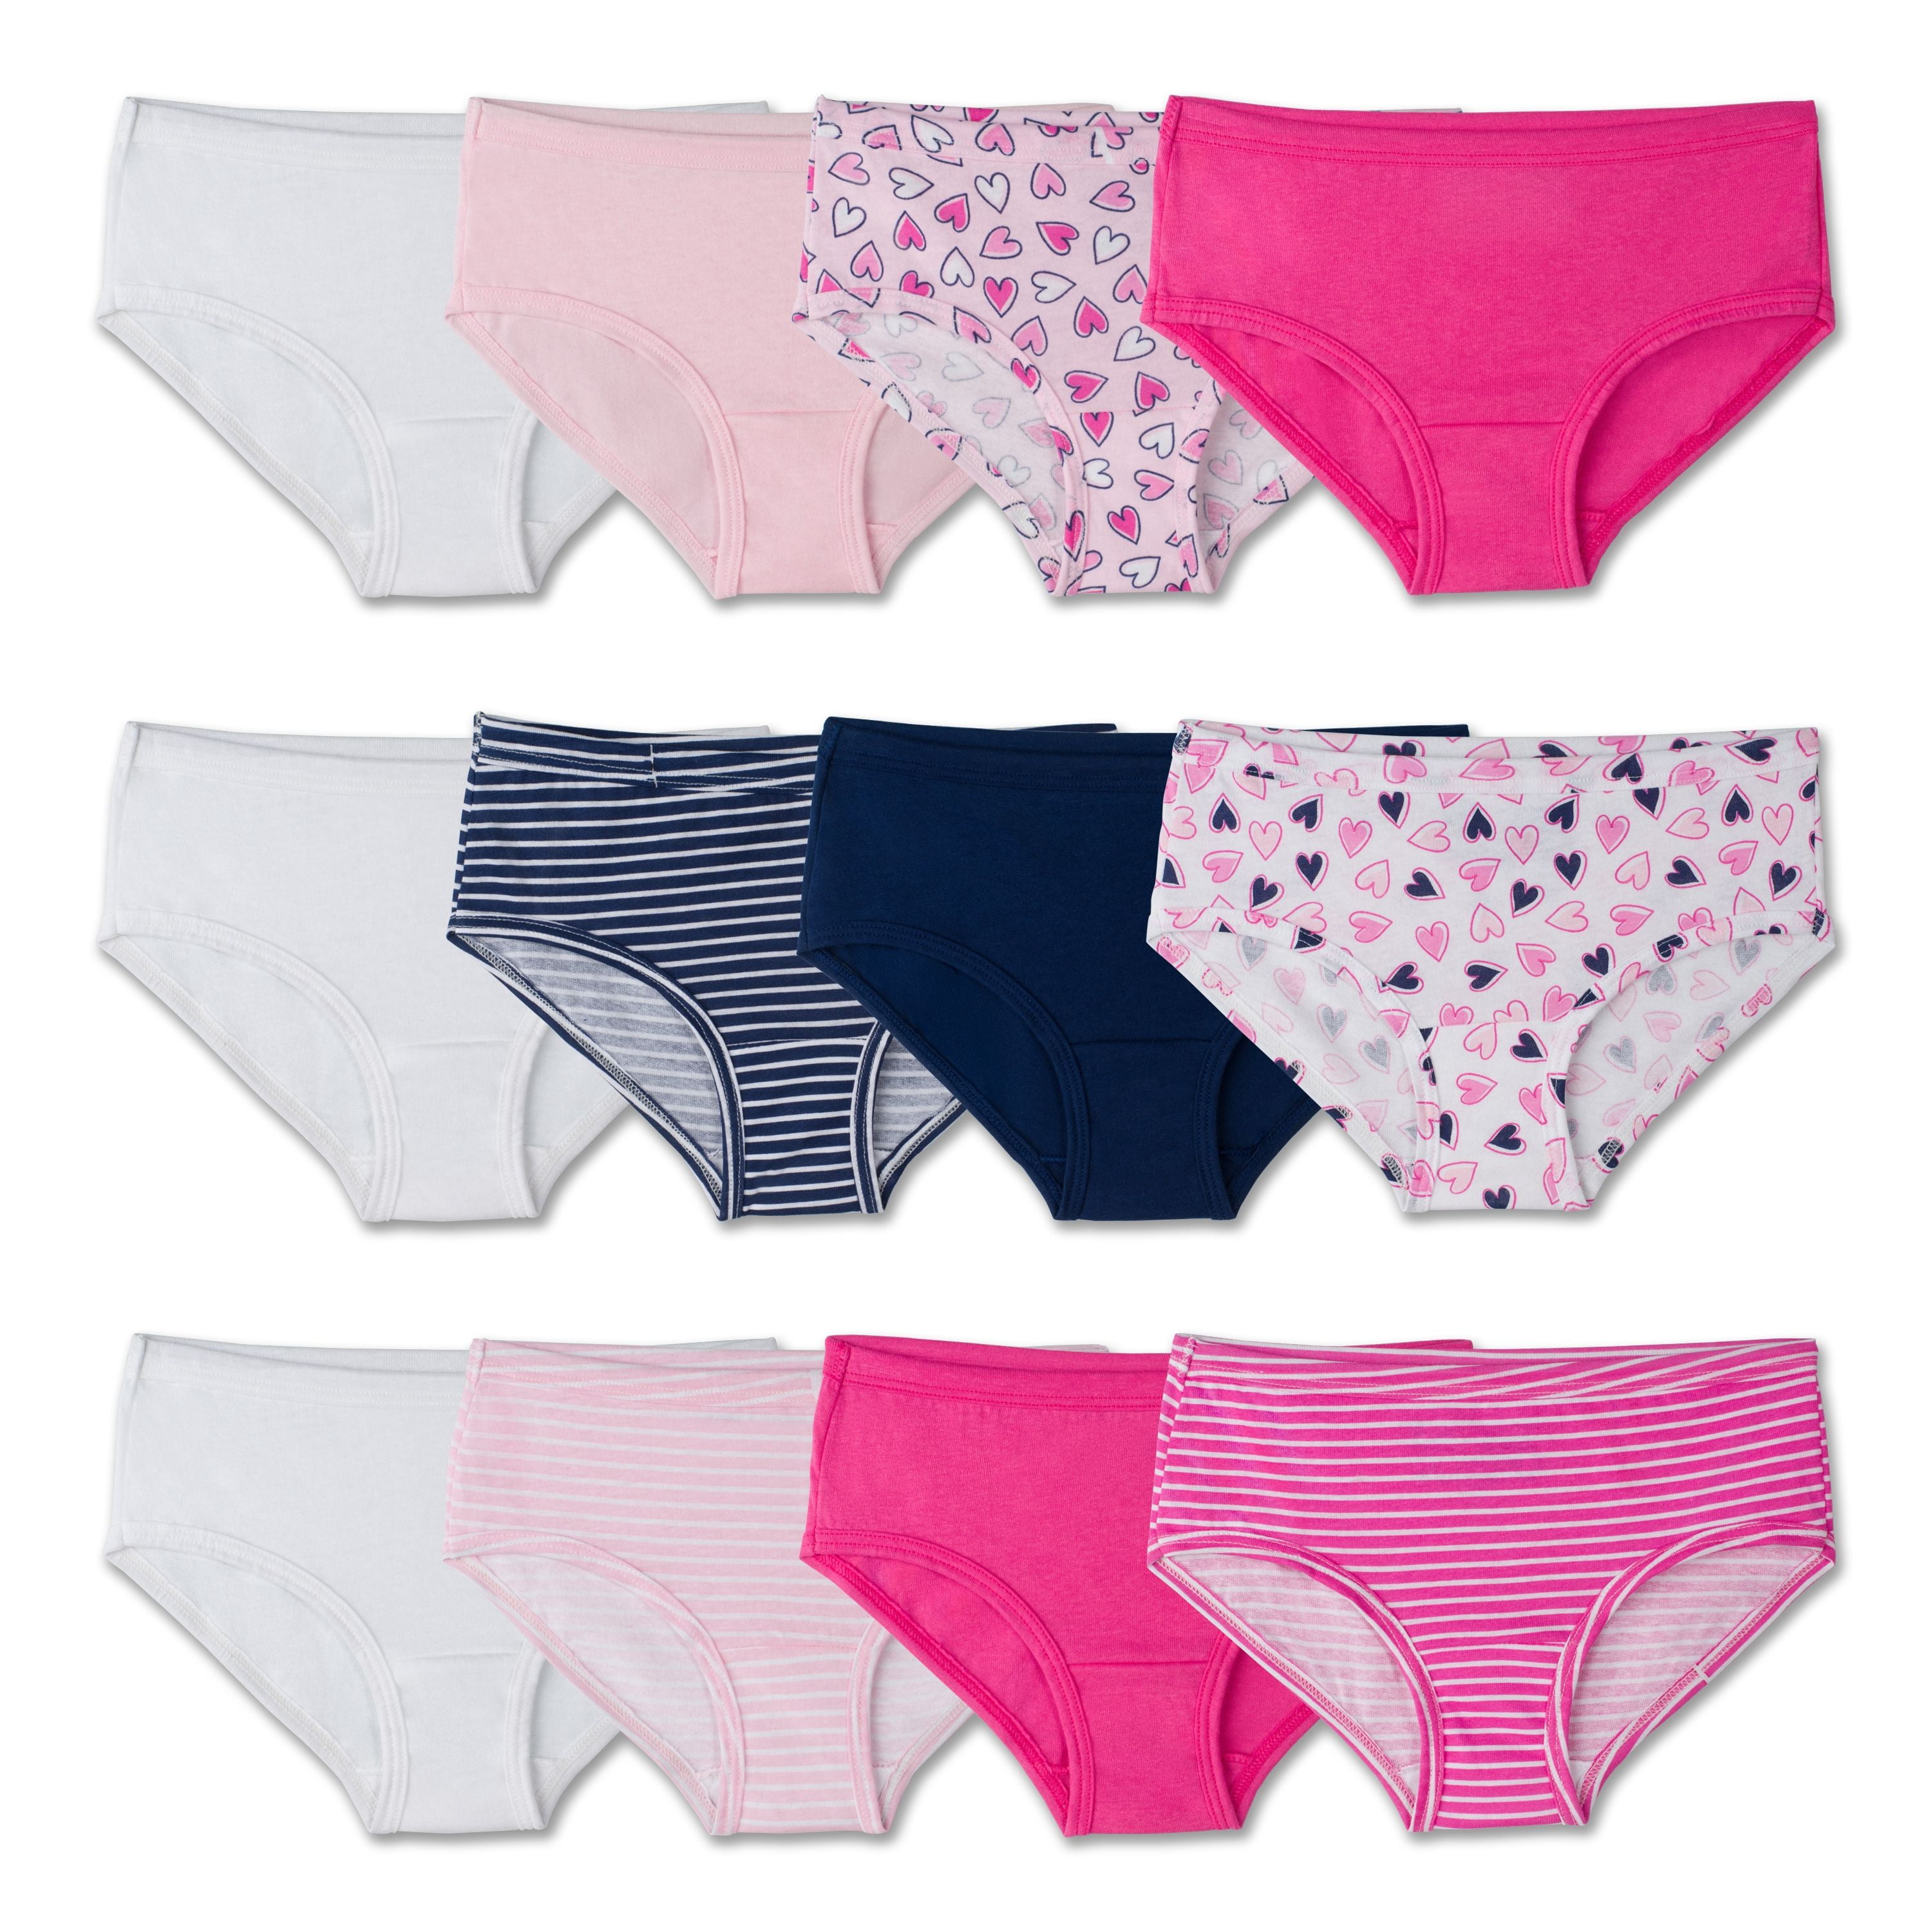 Fruit of the Loom Underwear Assorted Cotton Hipster Panties, 12 Pack ...